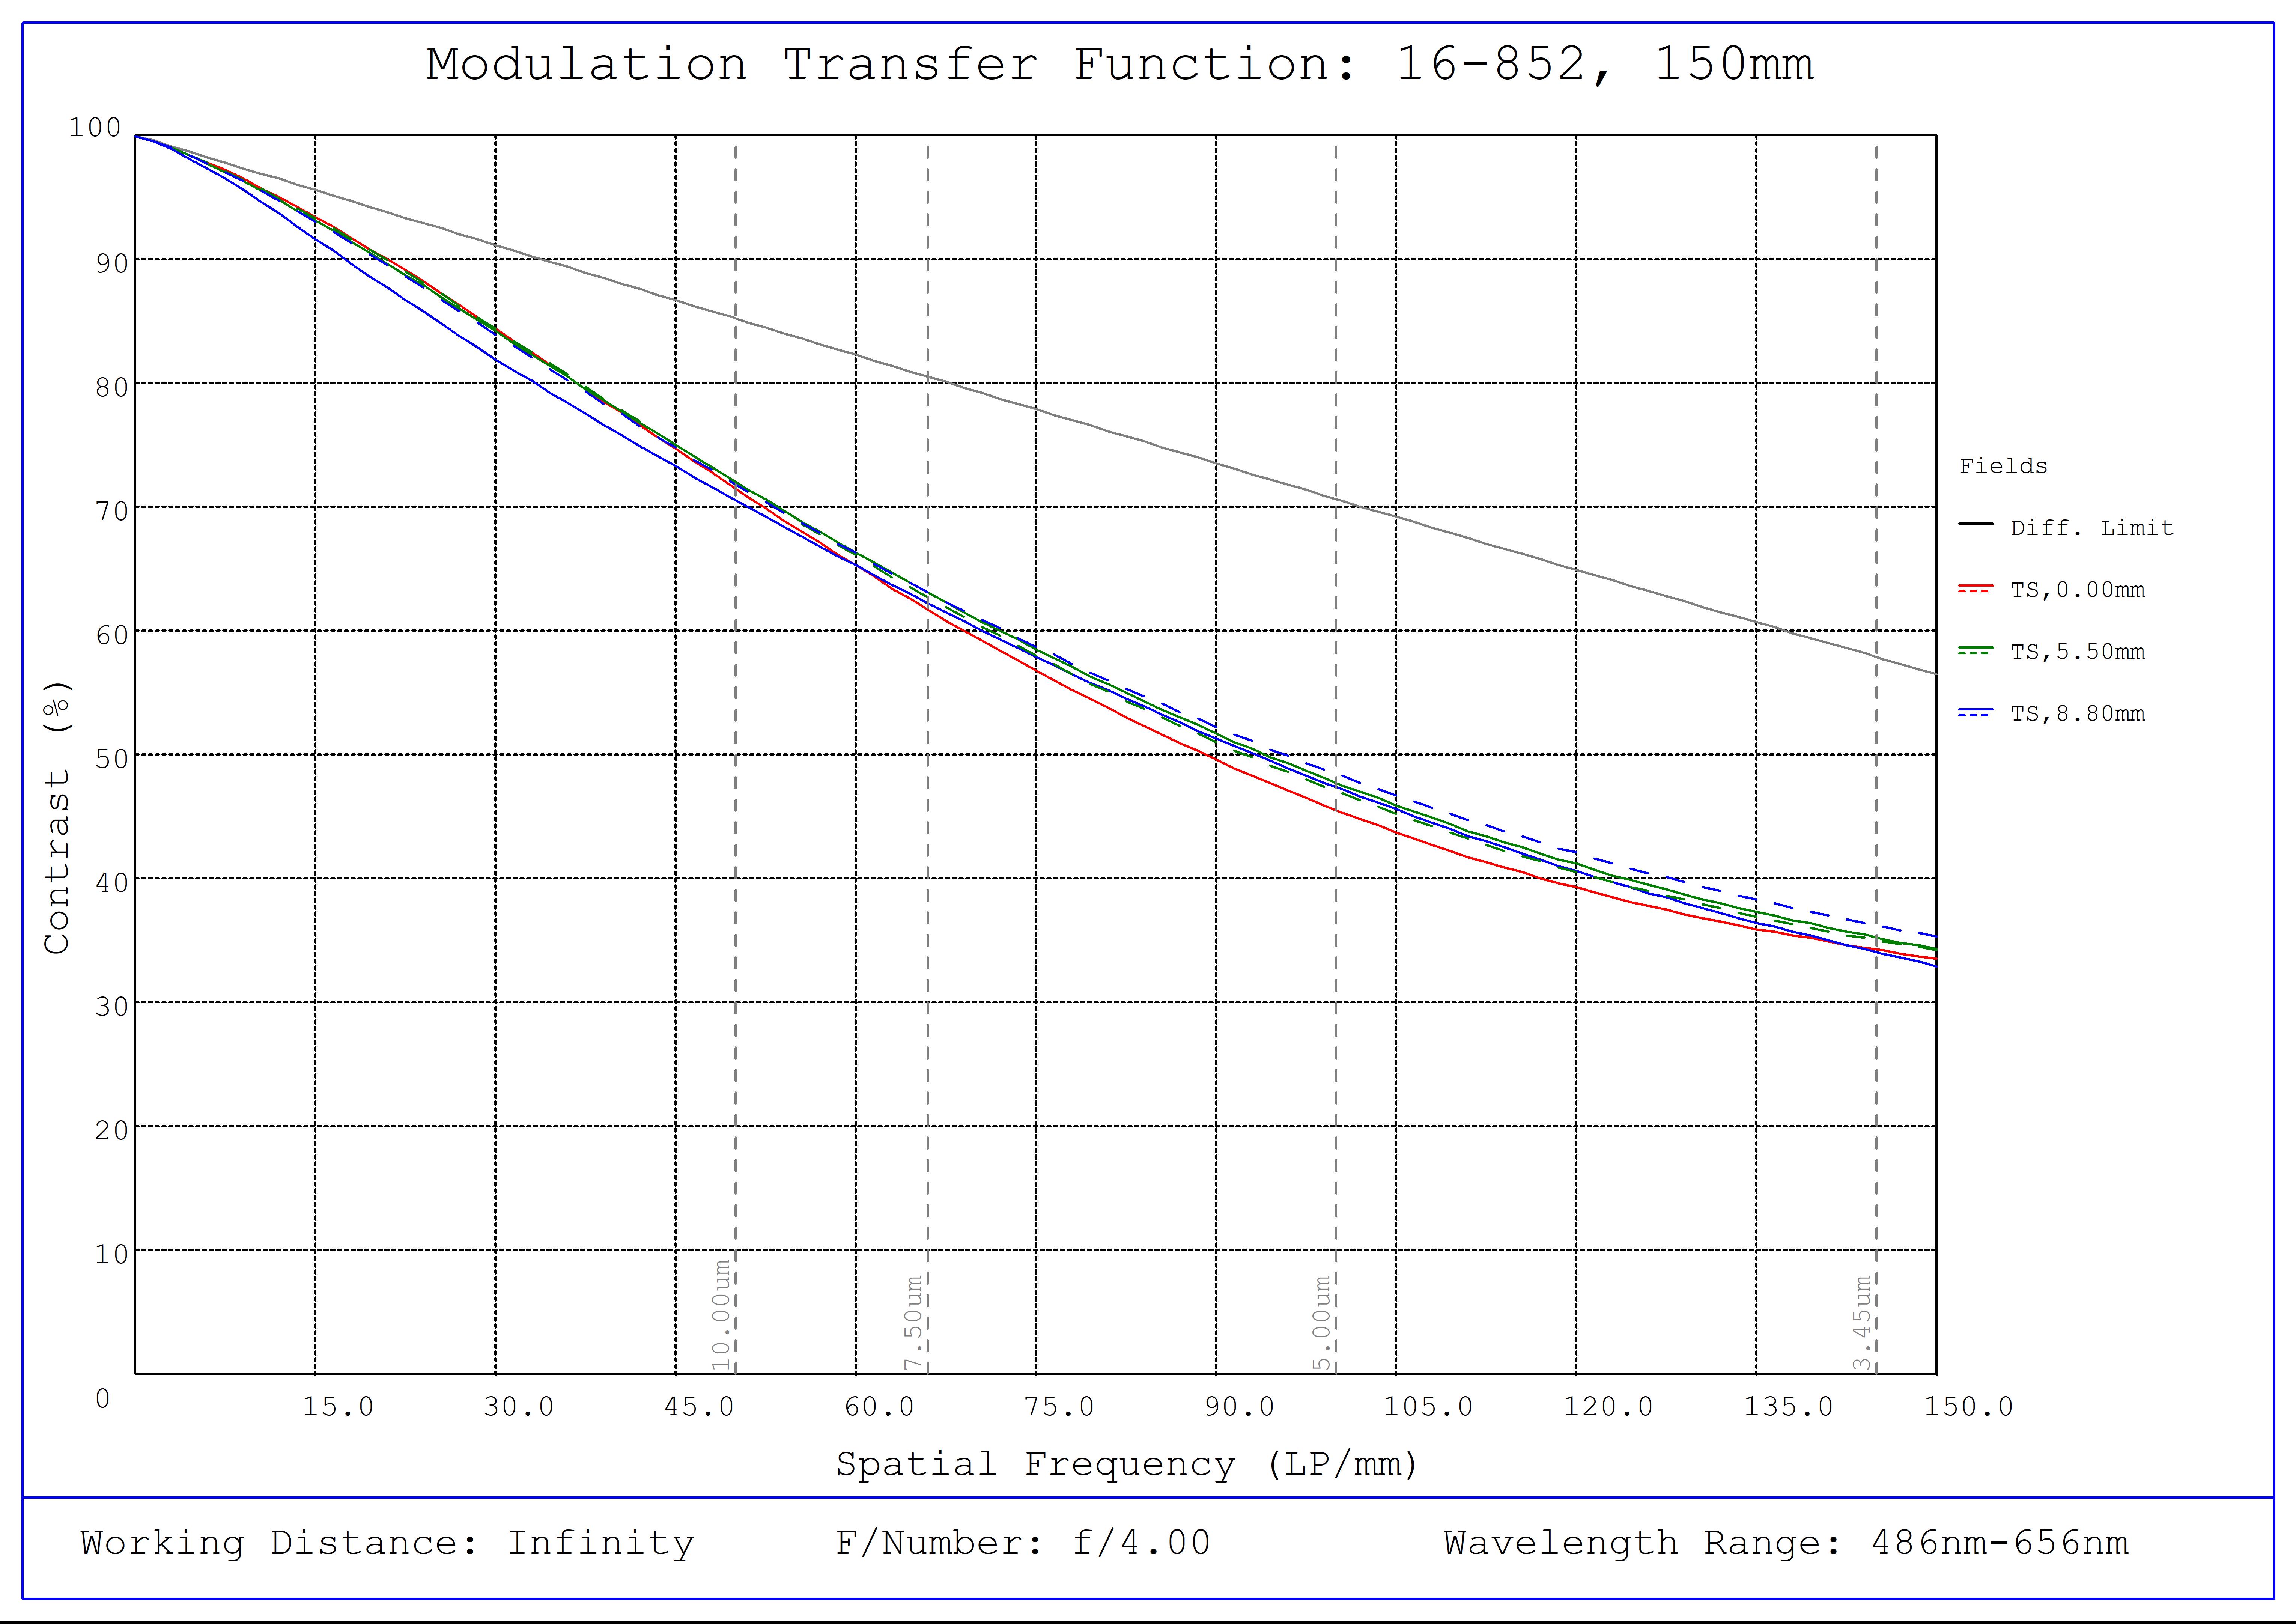 #16-852, 150mm, f/4 Athermal Lens, Modulated Transfer Function (MTF) Plot, Working Distance: Infinity, f4